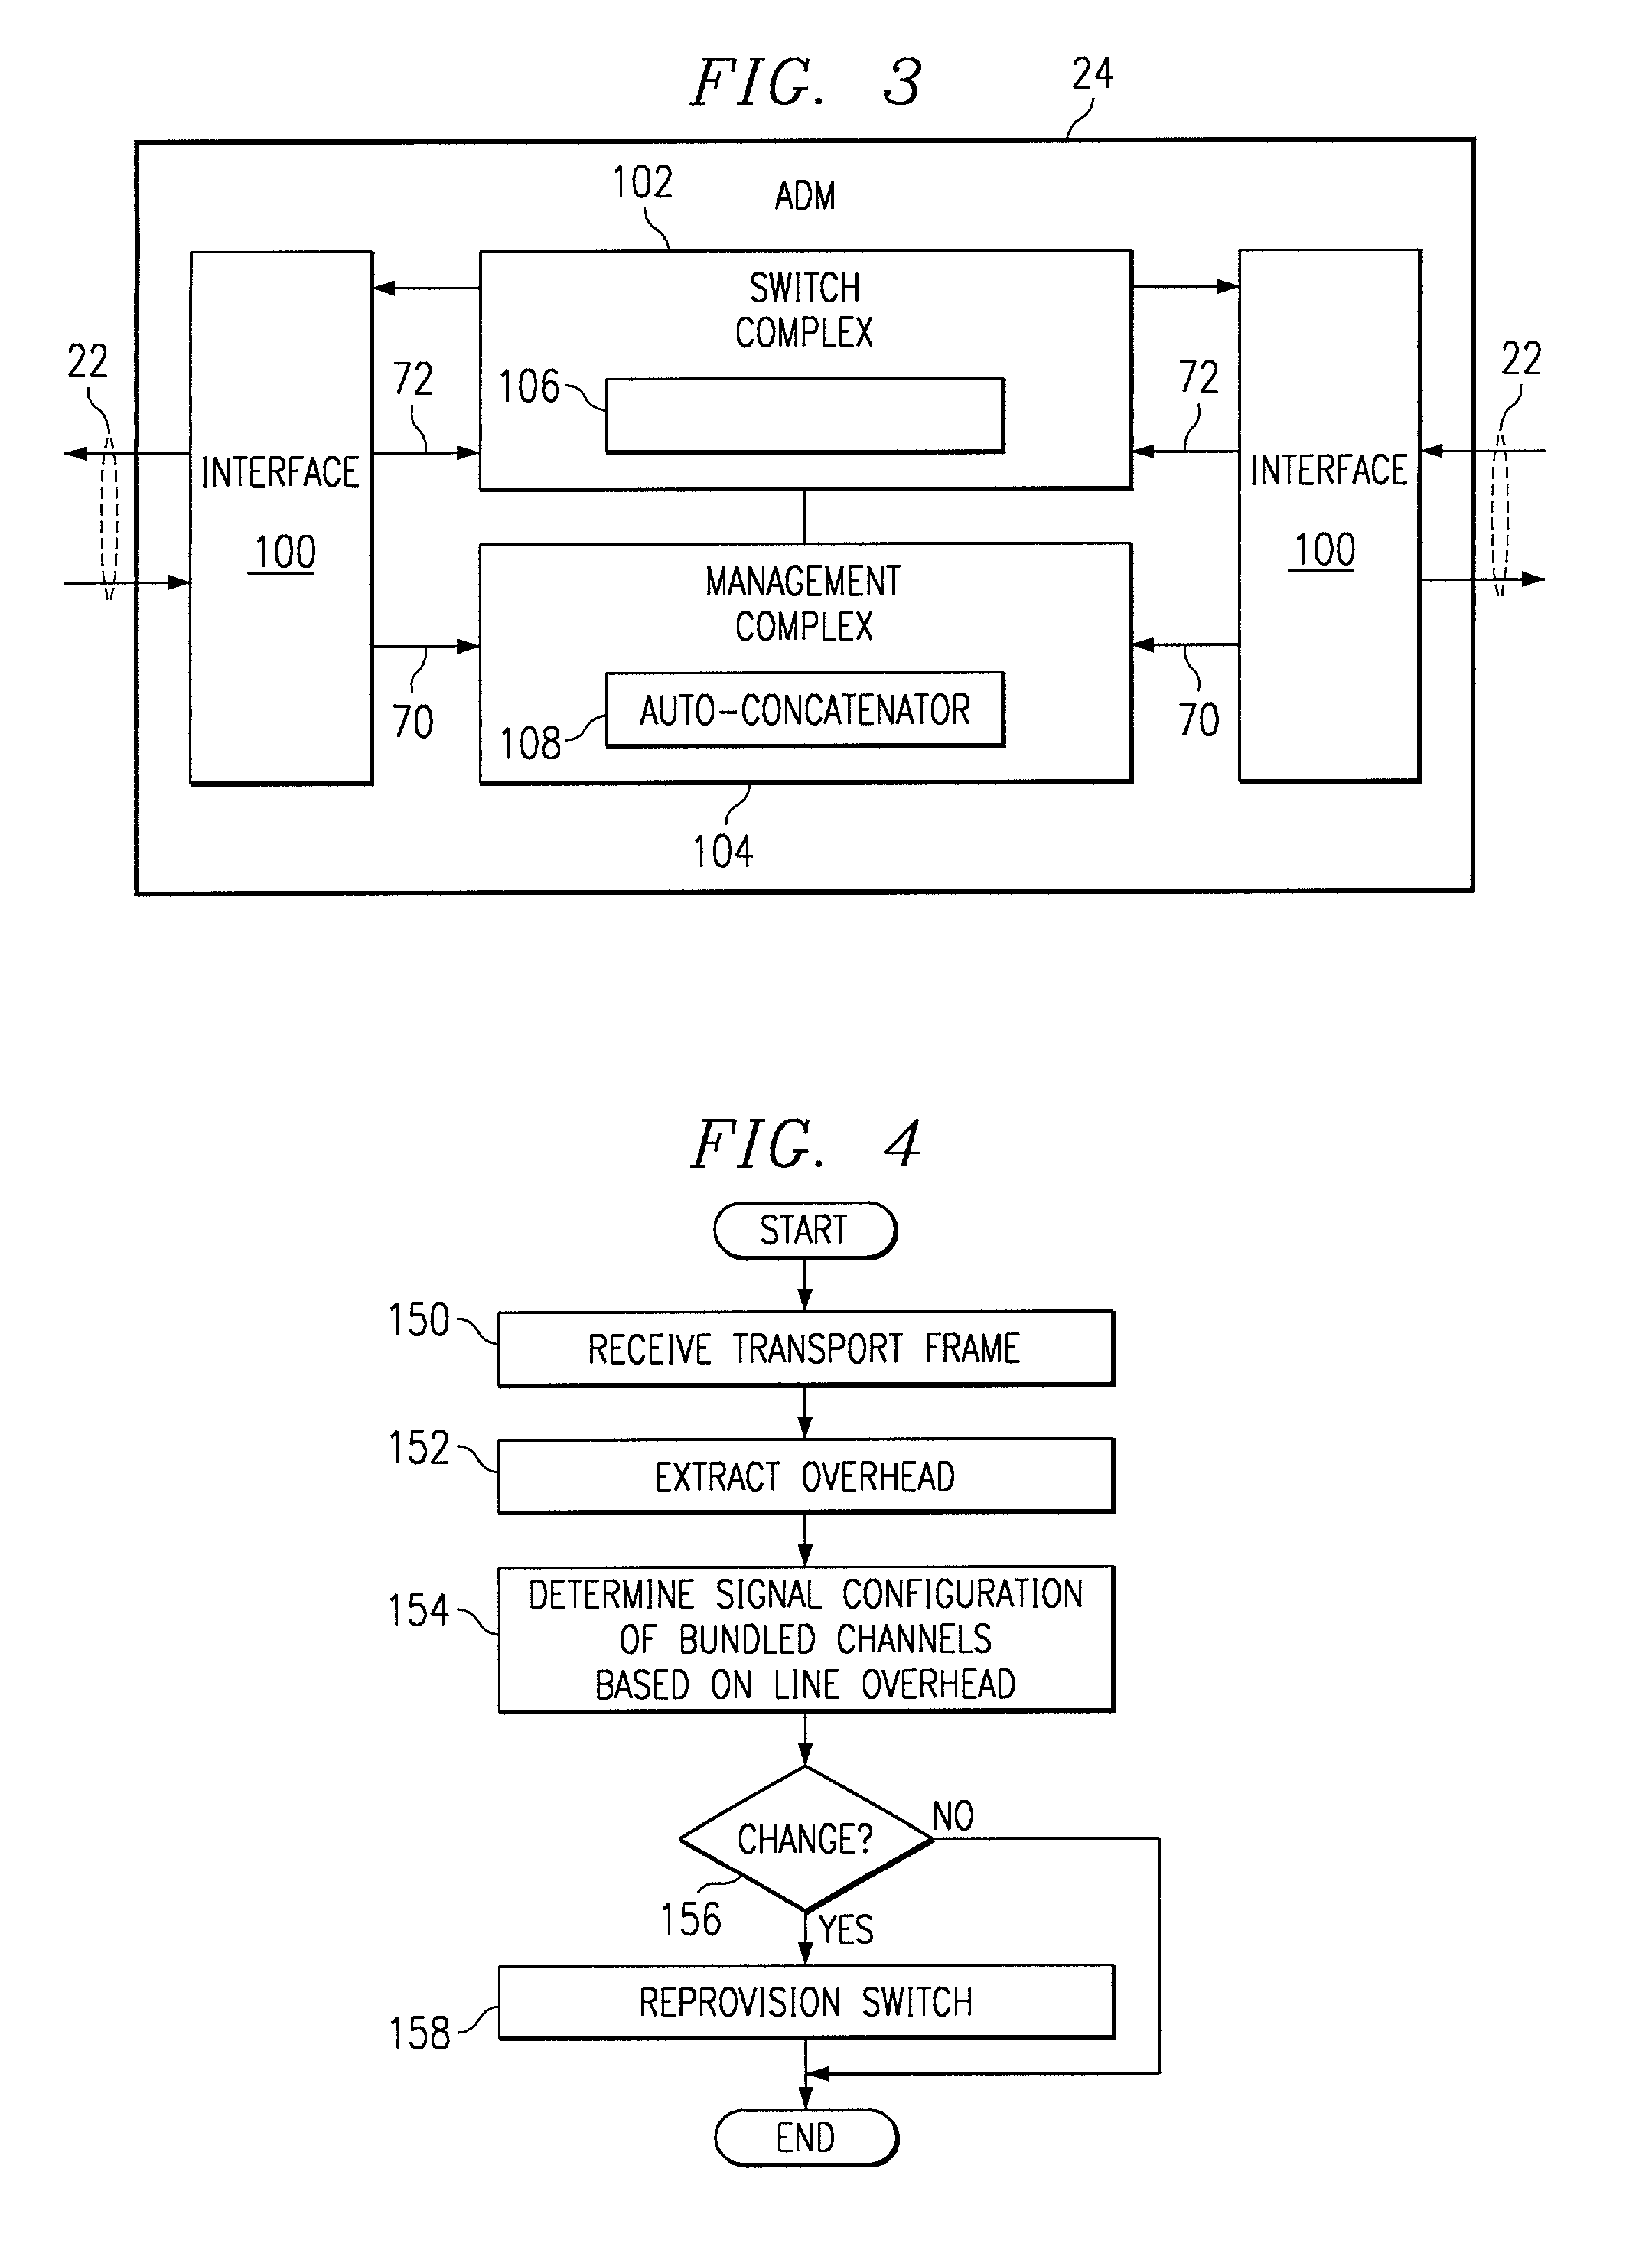 Method and system for automatic concatenation detection of synchronous optical network (SONET) channels